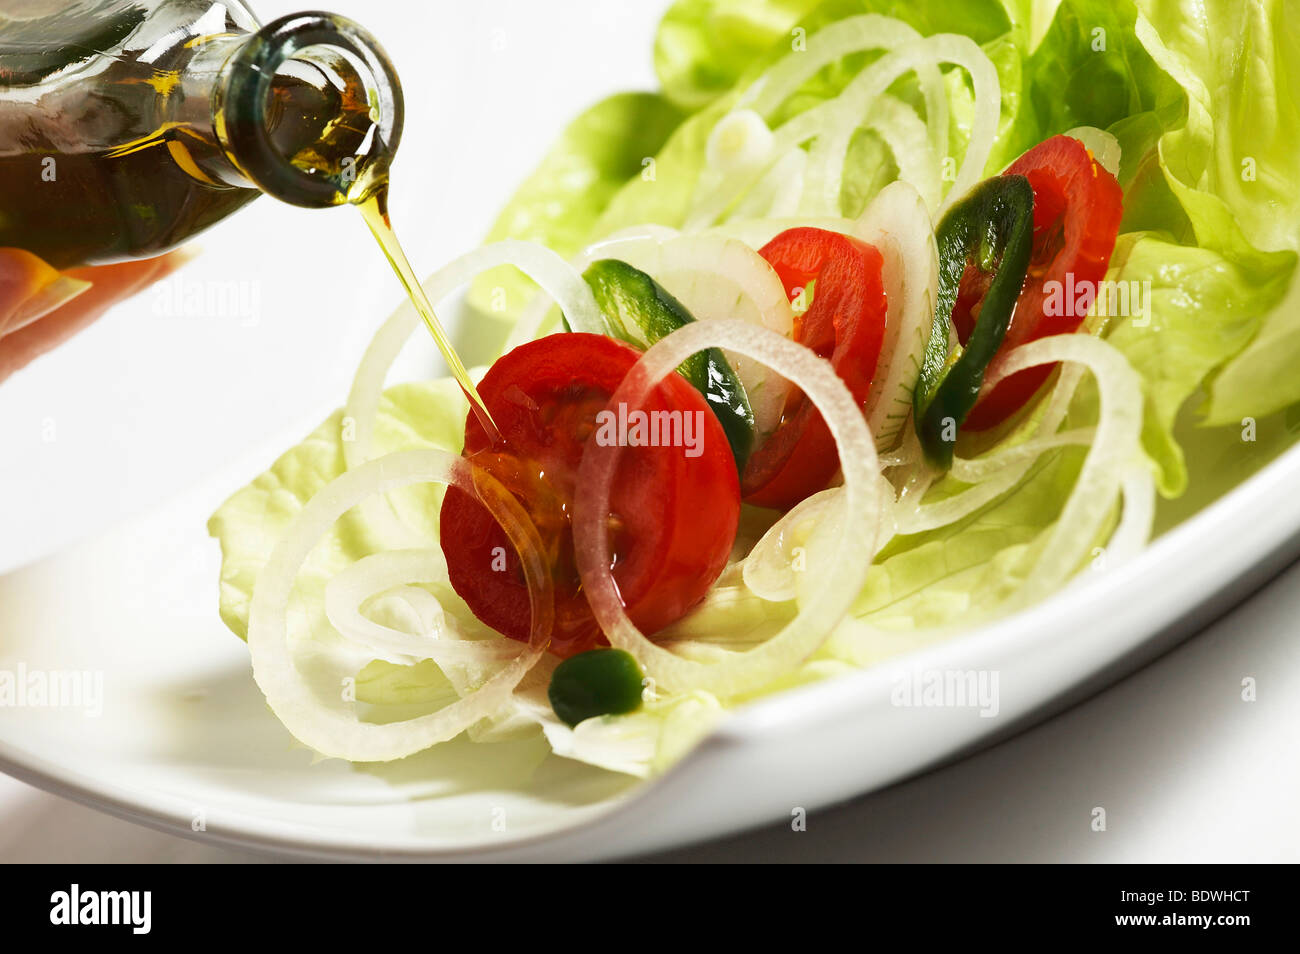 Salad dish, lettuce and tomato, with olive oil Stock Photo